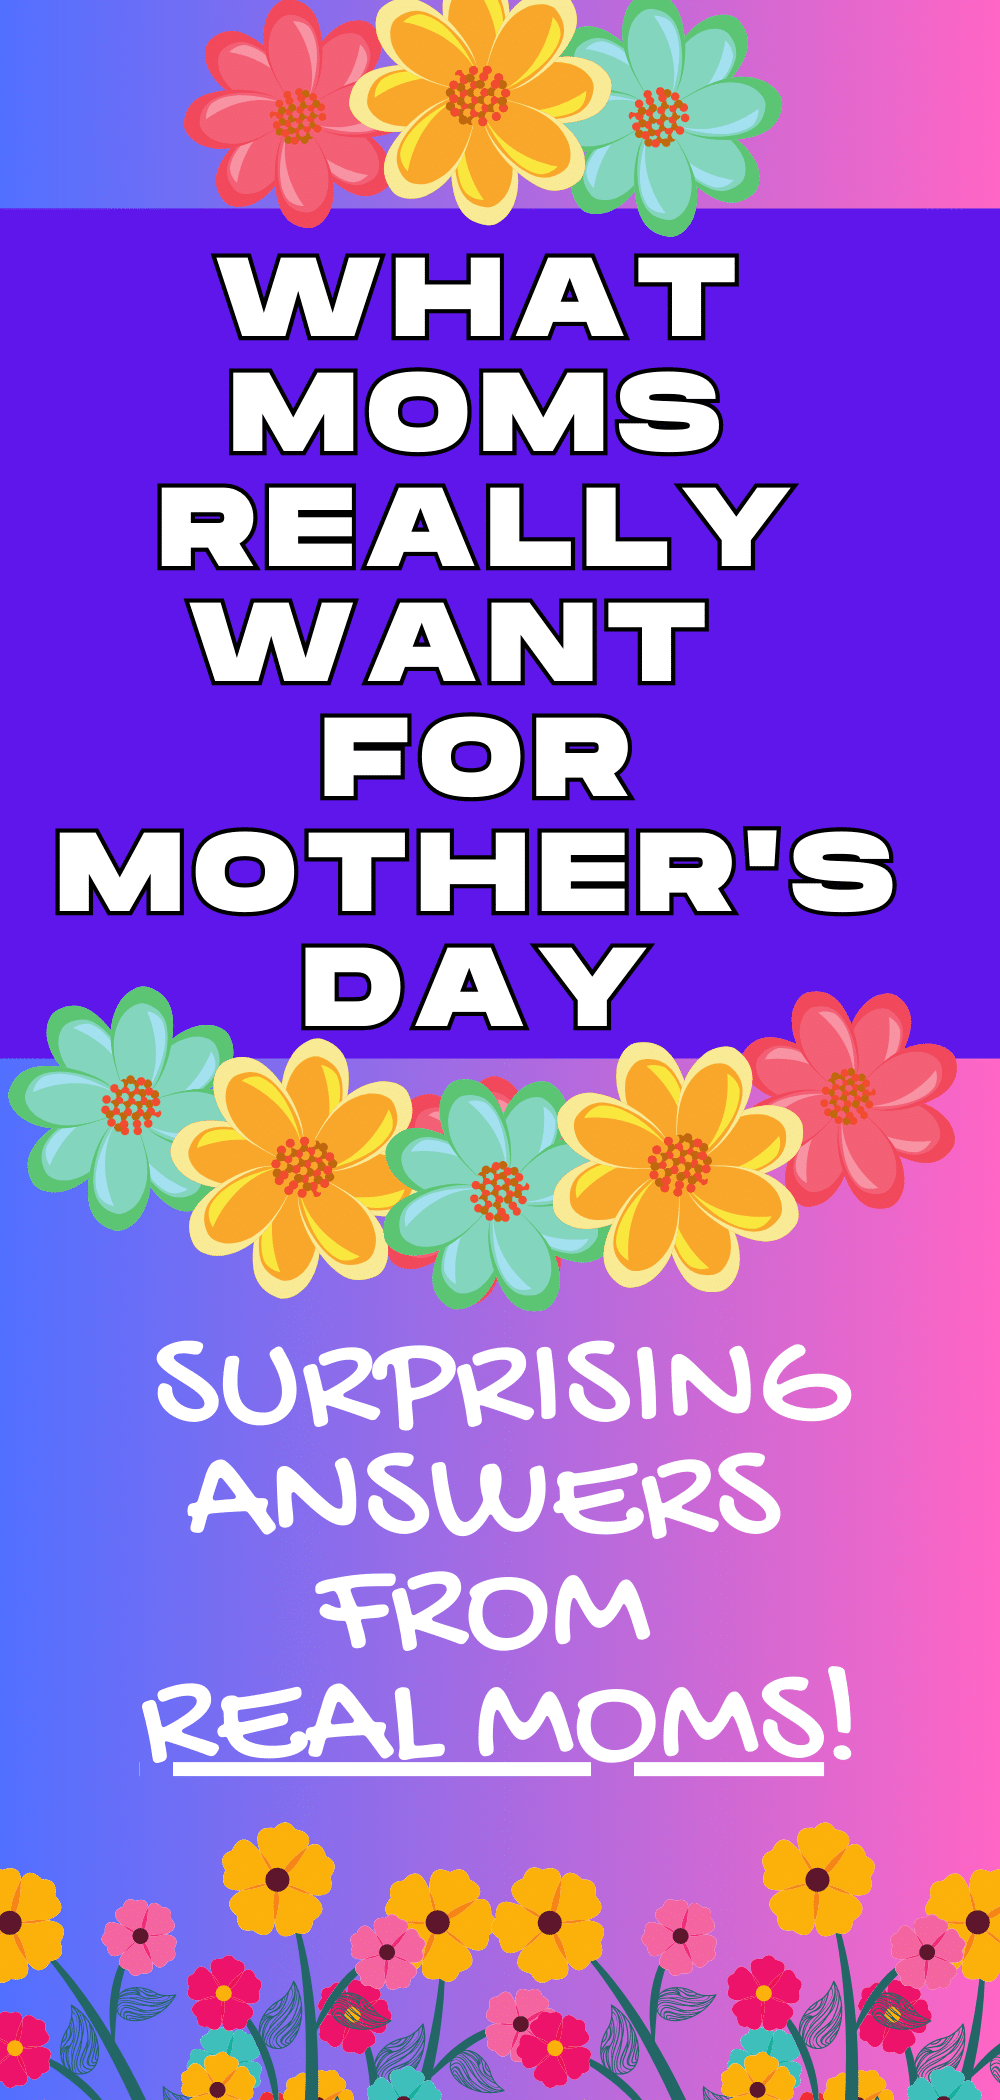 Gifts For Homeschool Moms That She Will Love (THING MOMS LISTED FOR MOTHER'S DAY PRESENTS)